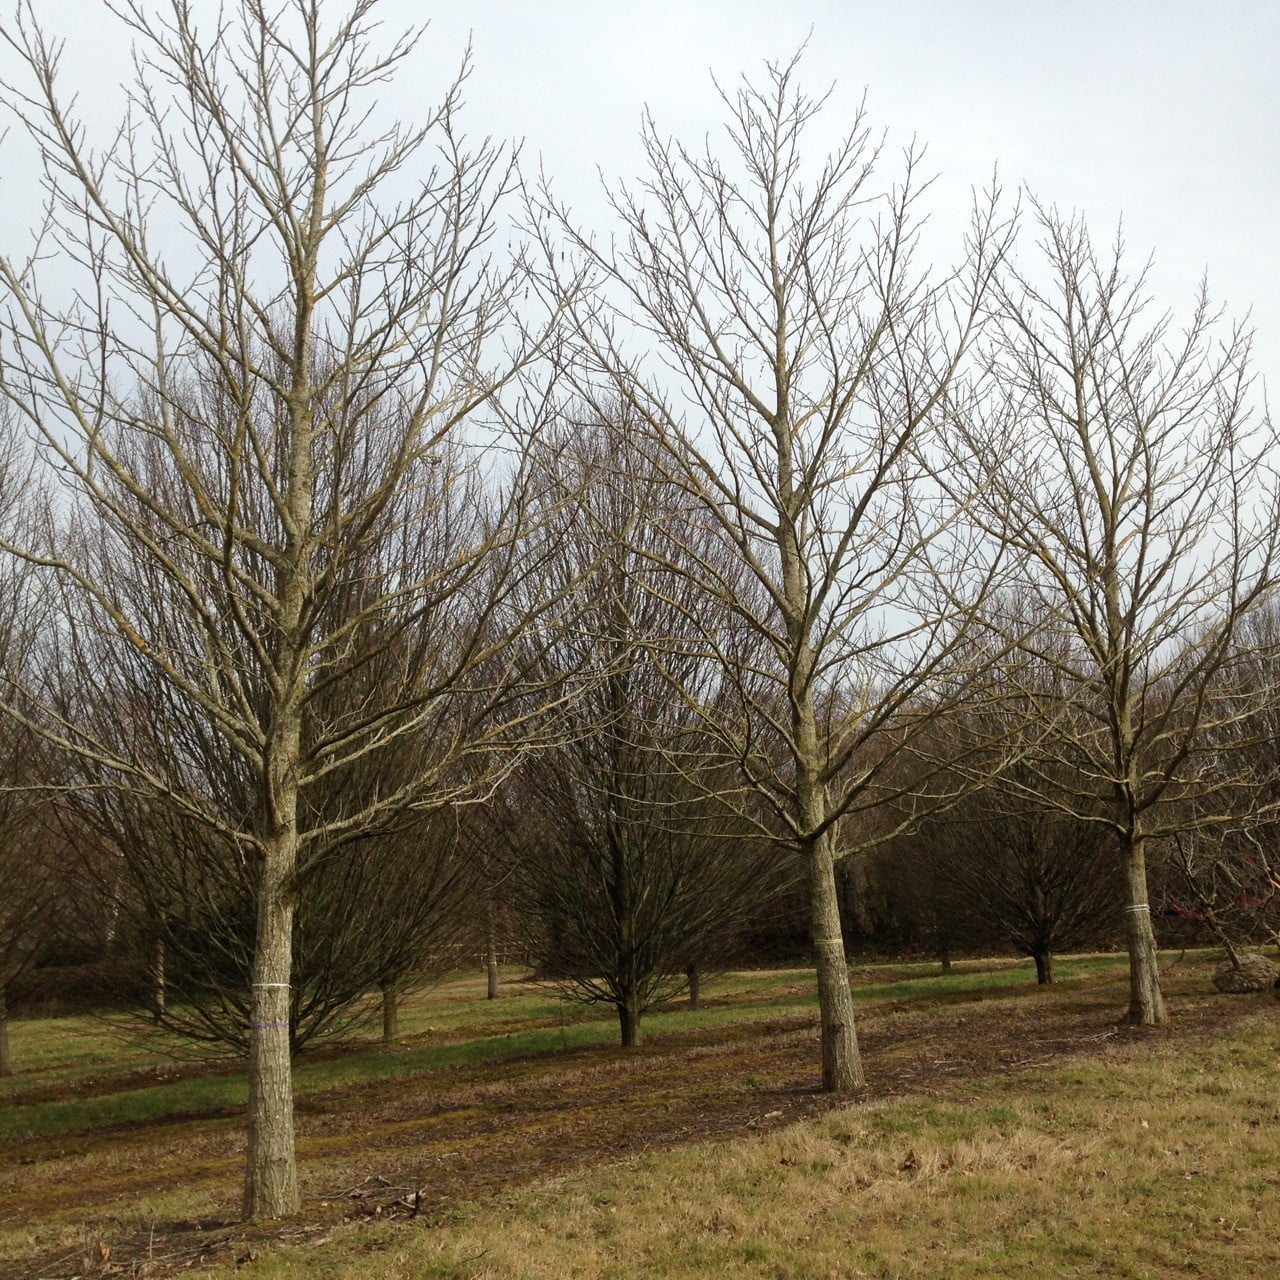 I bought these mature wing nut trees for a large estate in the Cotswolds - aren't they beautiful?